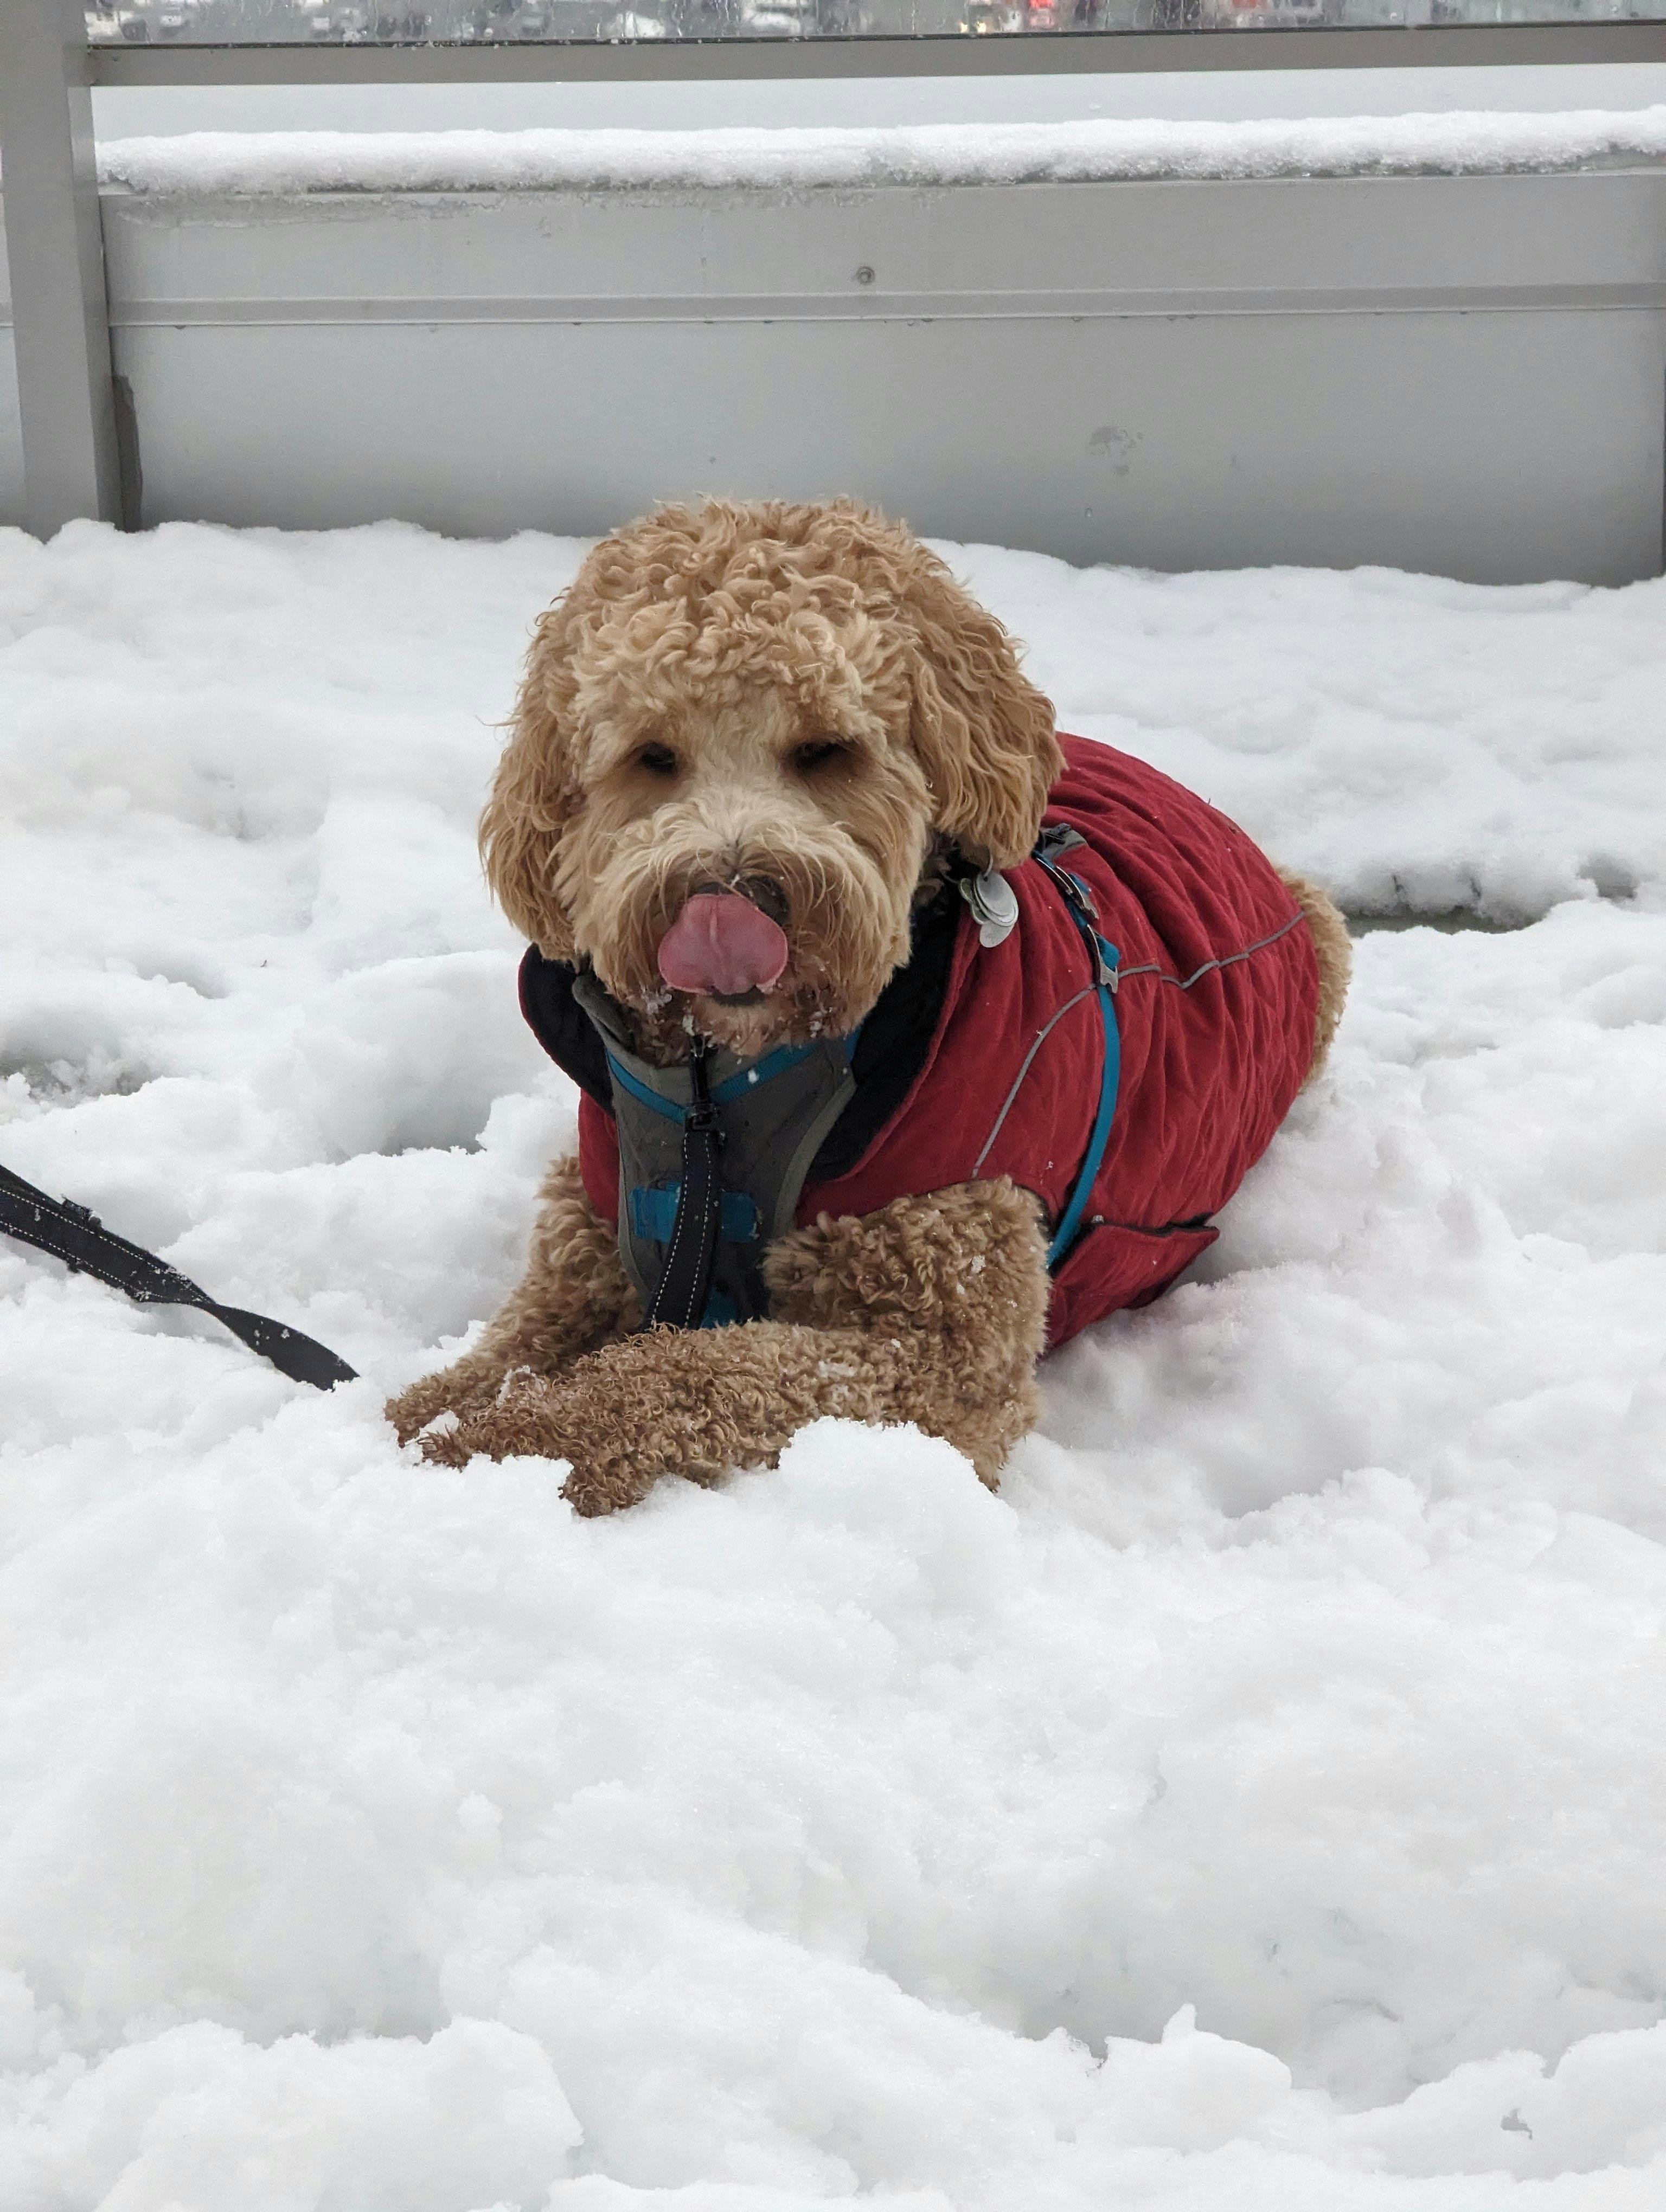 Yoda the dog licking his nose while sitting in the snow wearing a red jacket